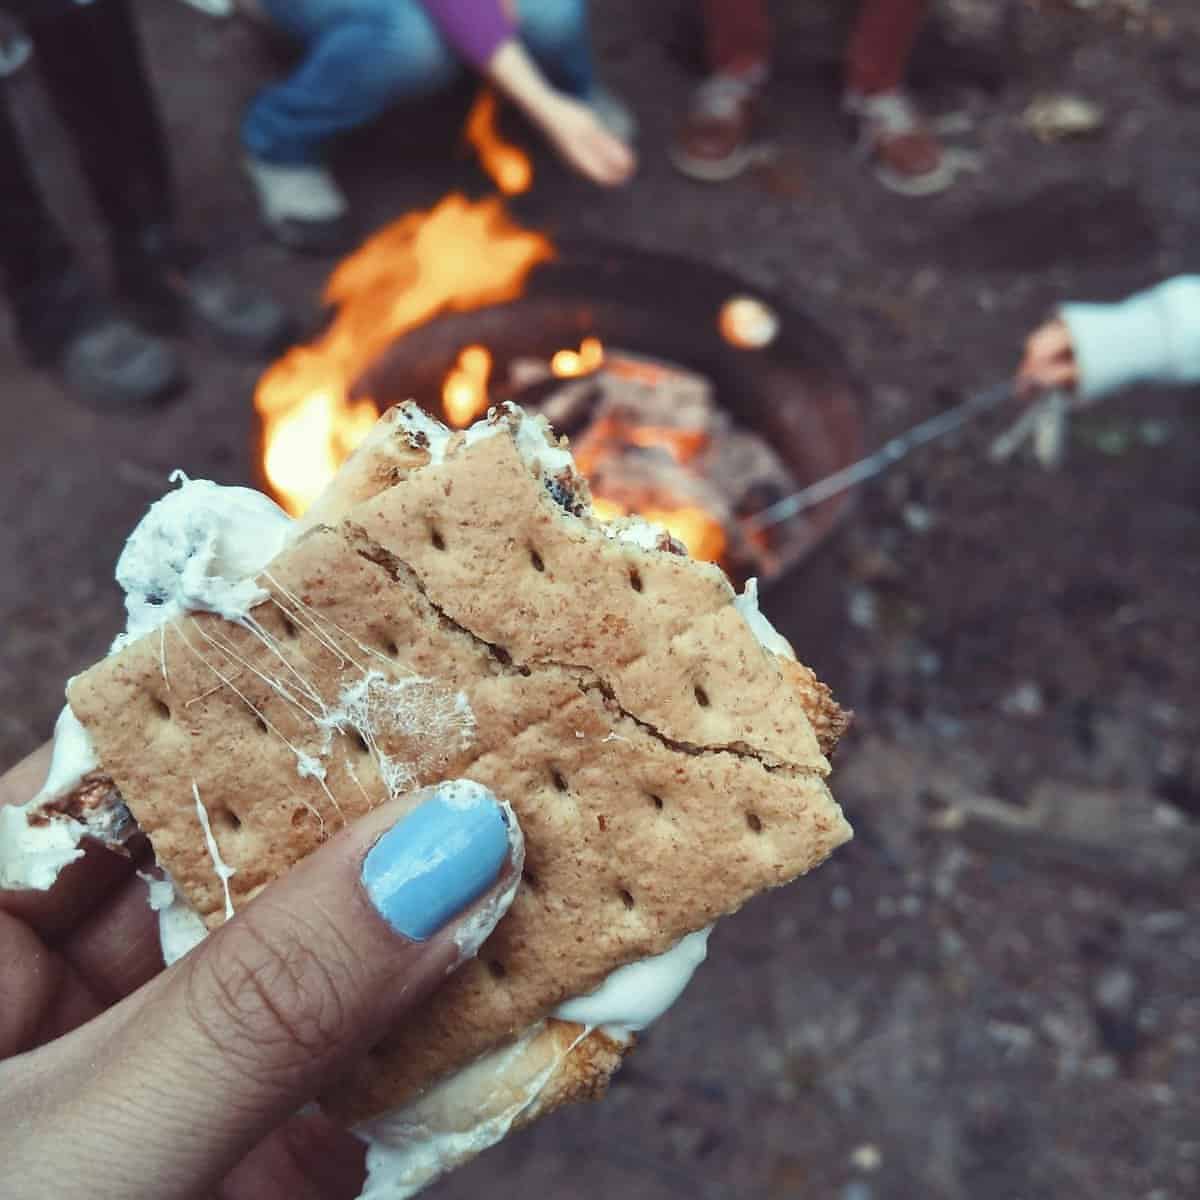 A person holding up a cracker with marshmallows on it.